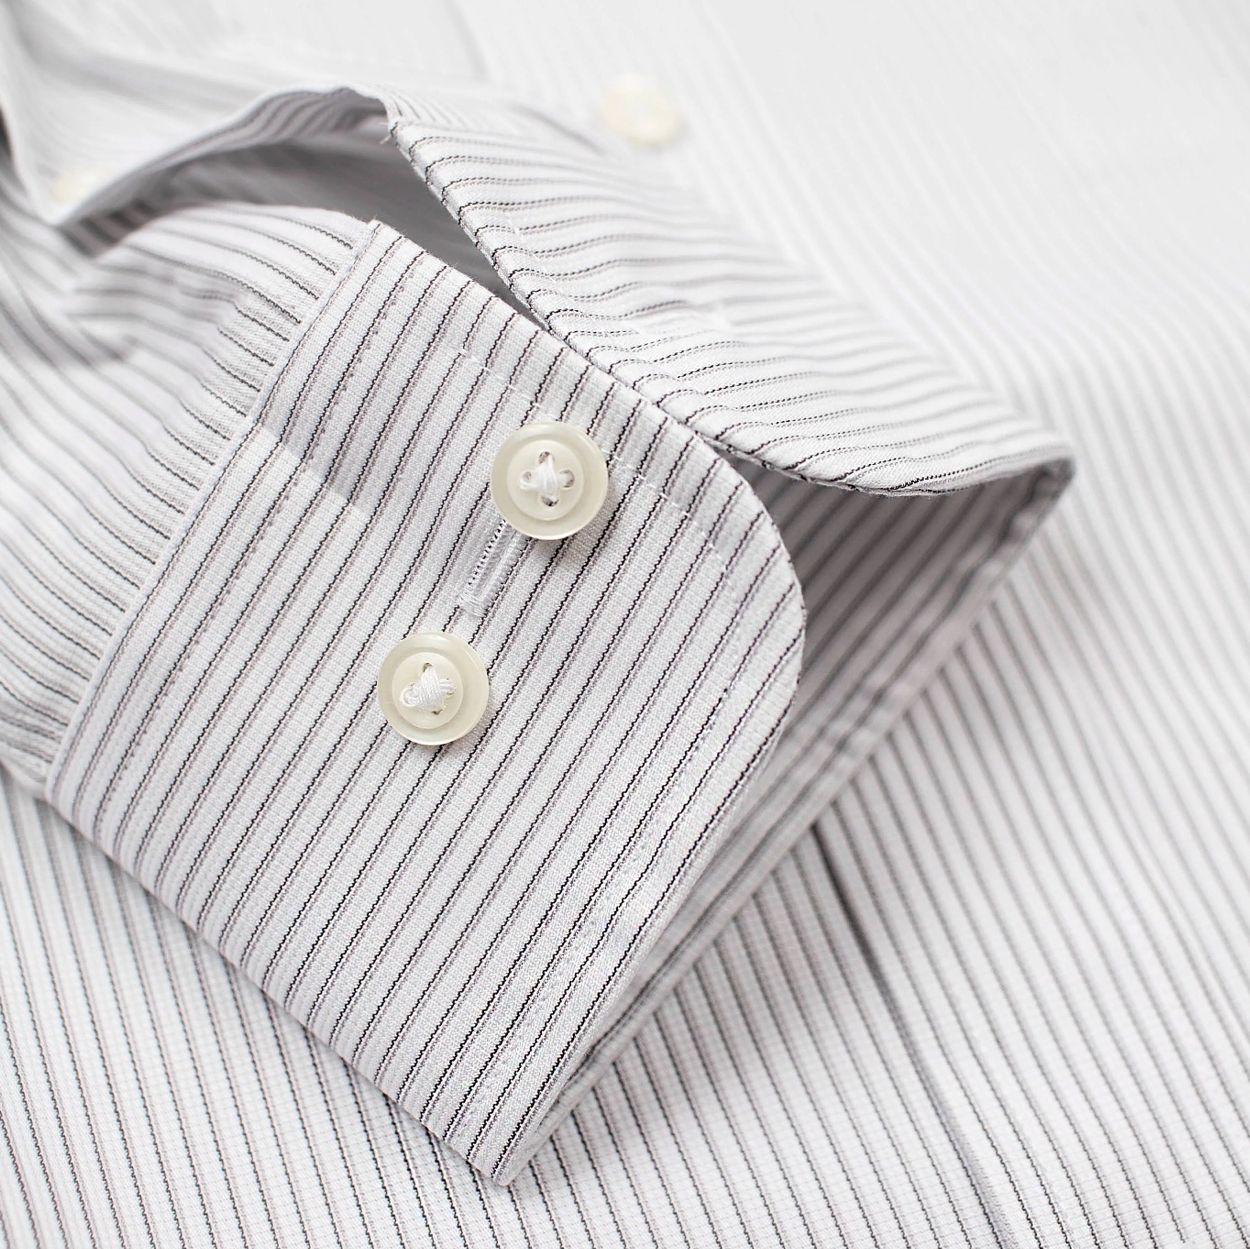 Black Textured Stripe Wrinkle-Free Stretch Cotton Dress Shirt with Spread Collar by Cooper & Stewart